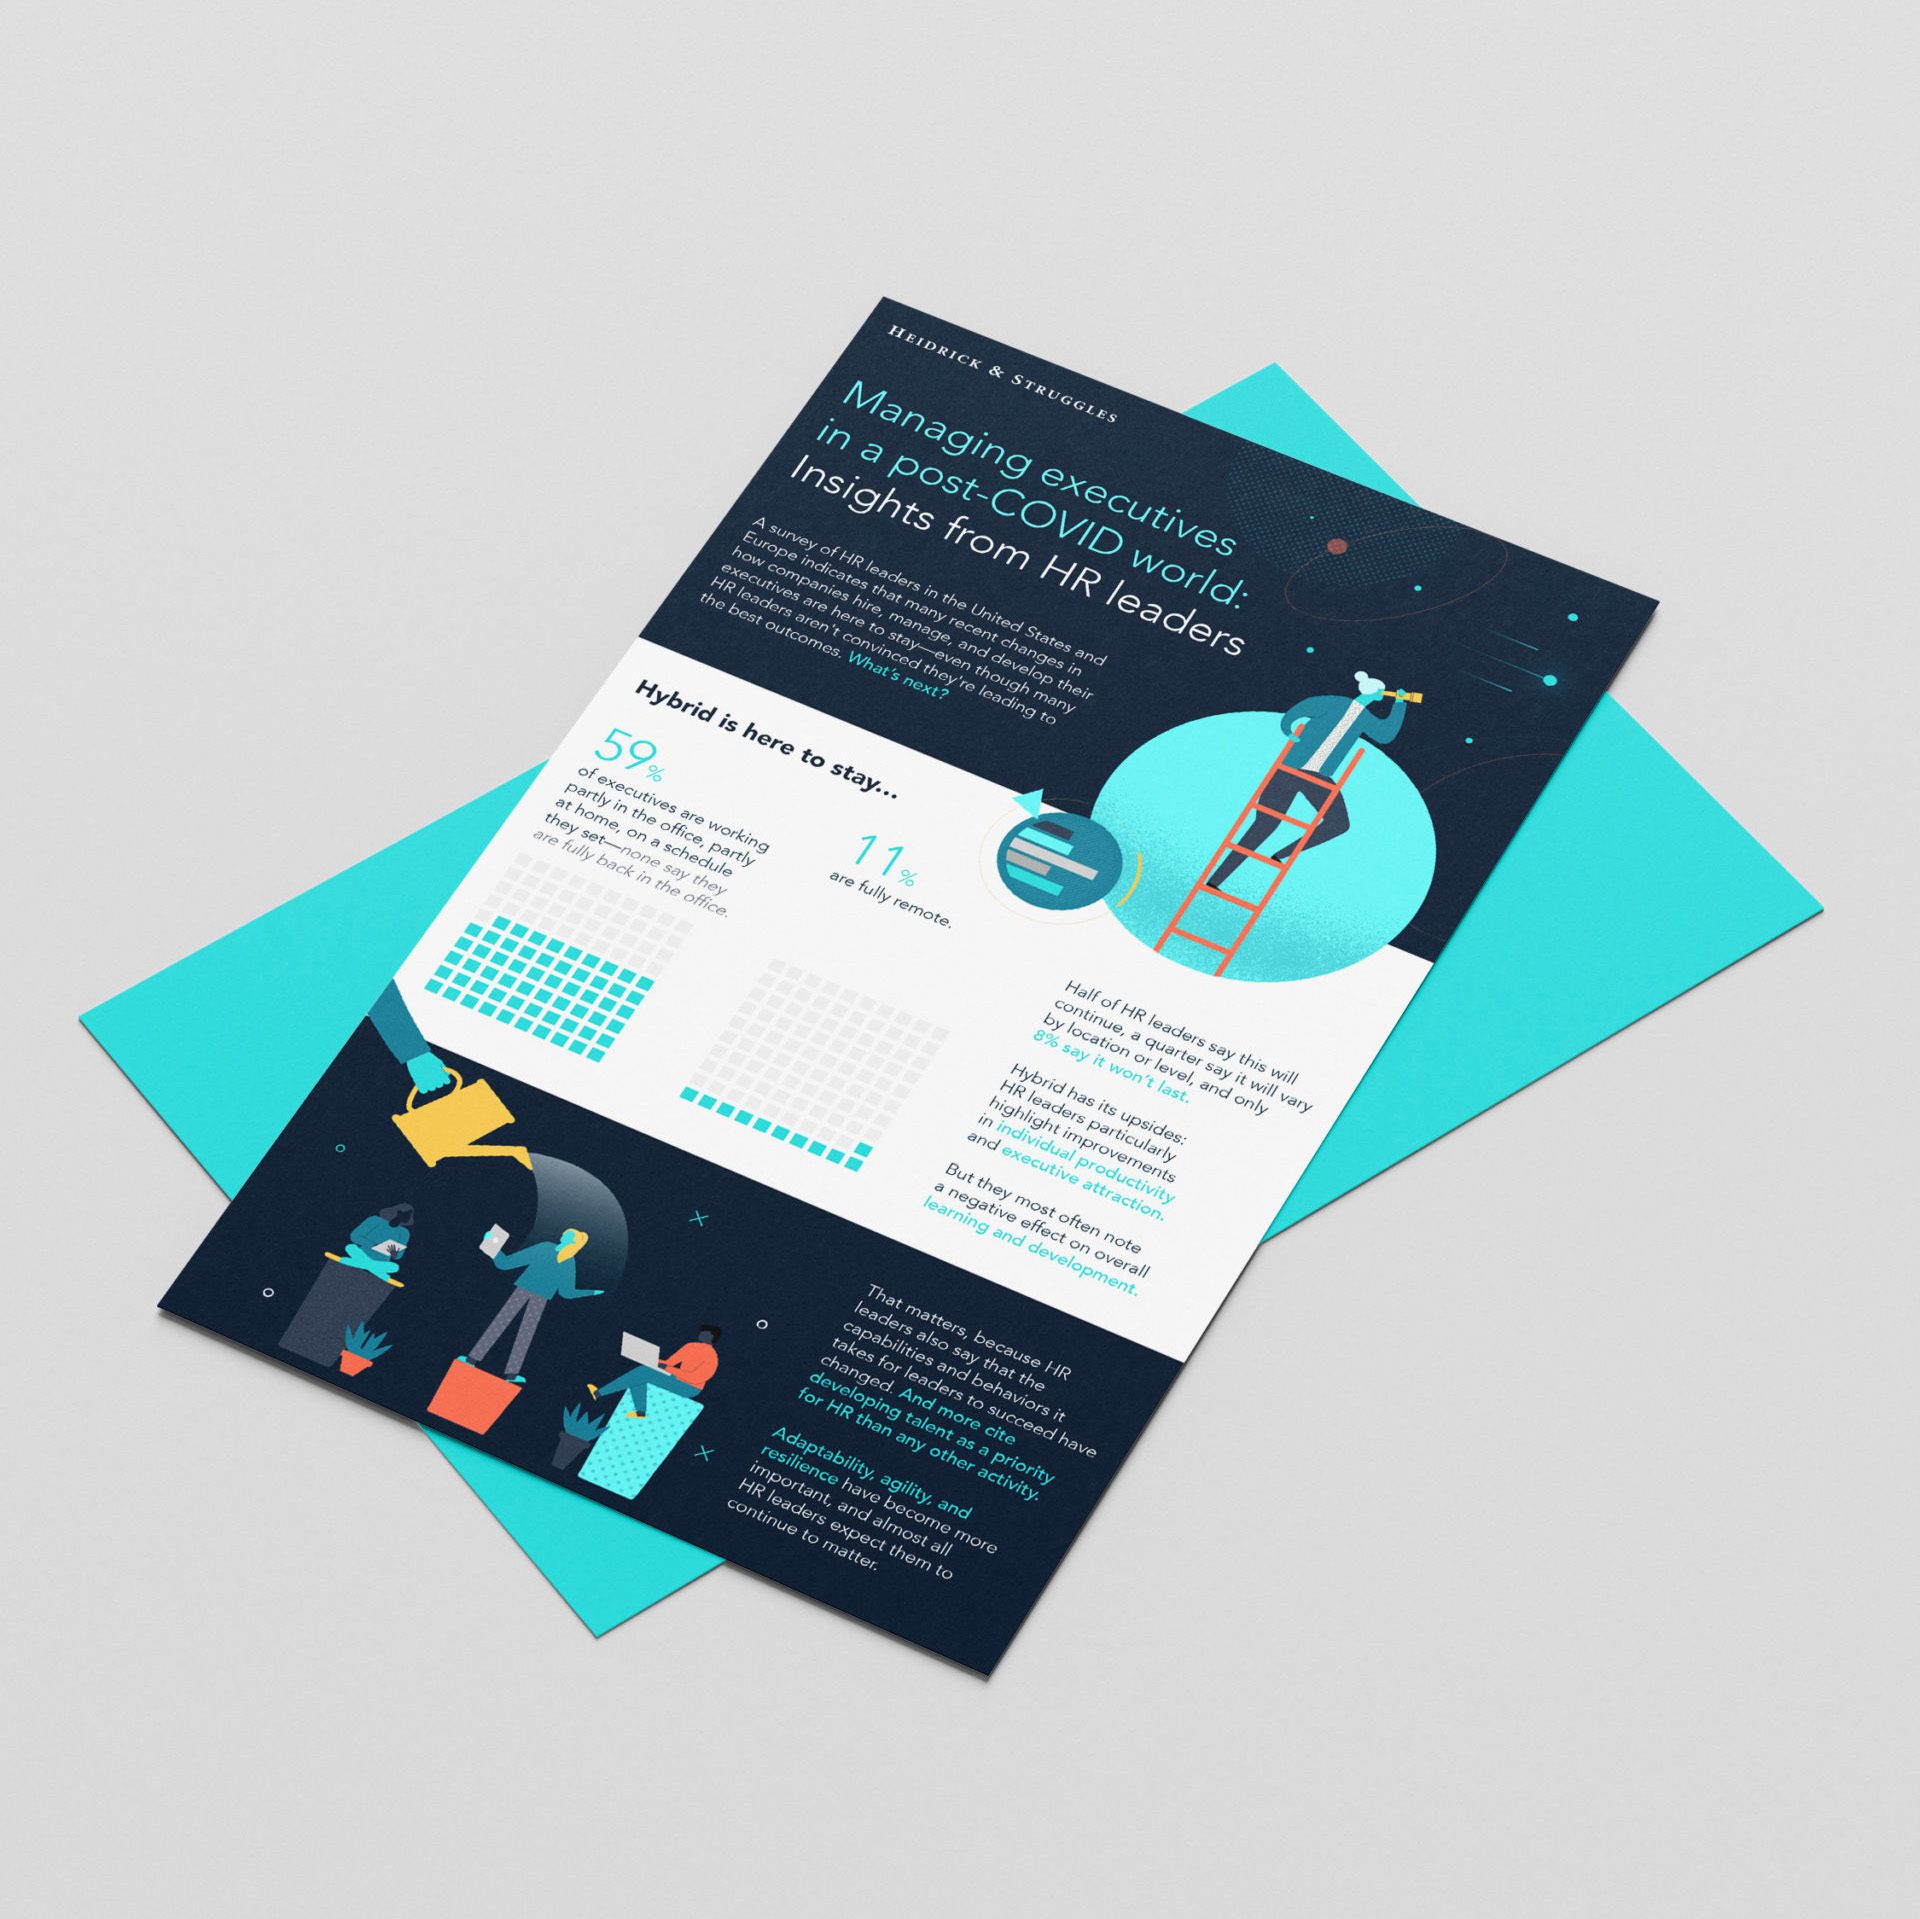 A professional infographic design brochure in a dark navy blue and turquoise colors.